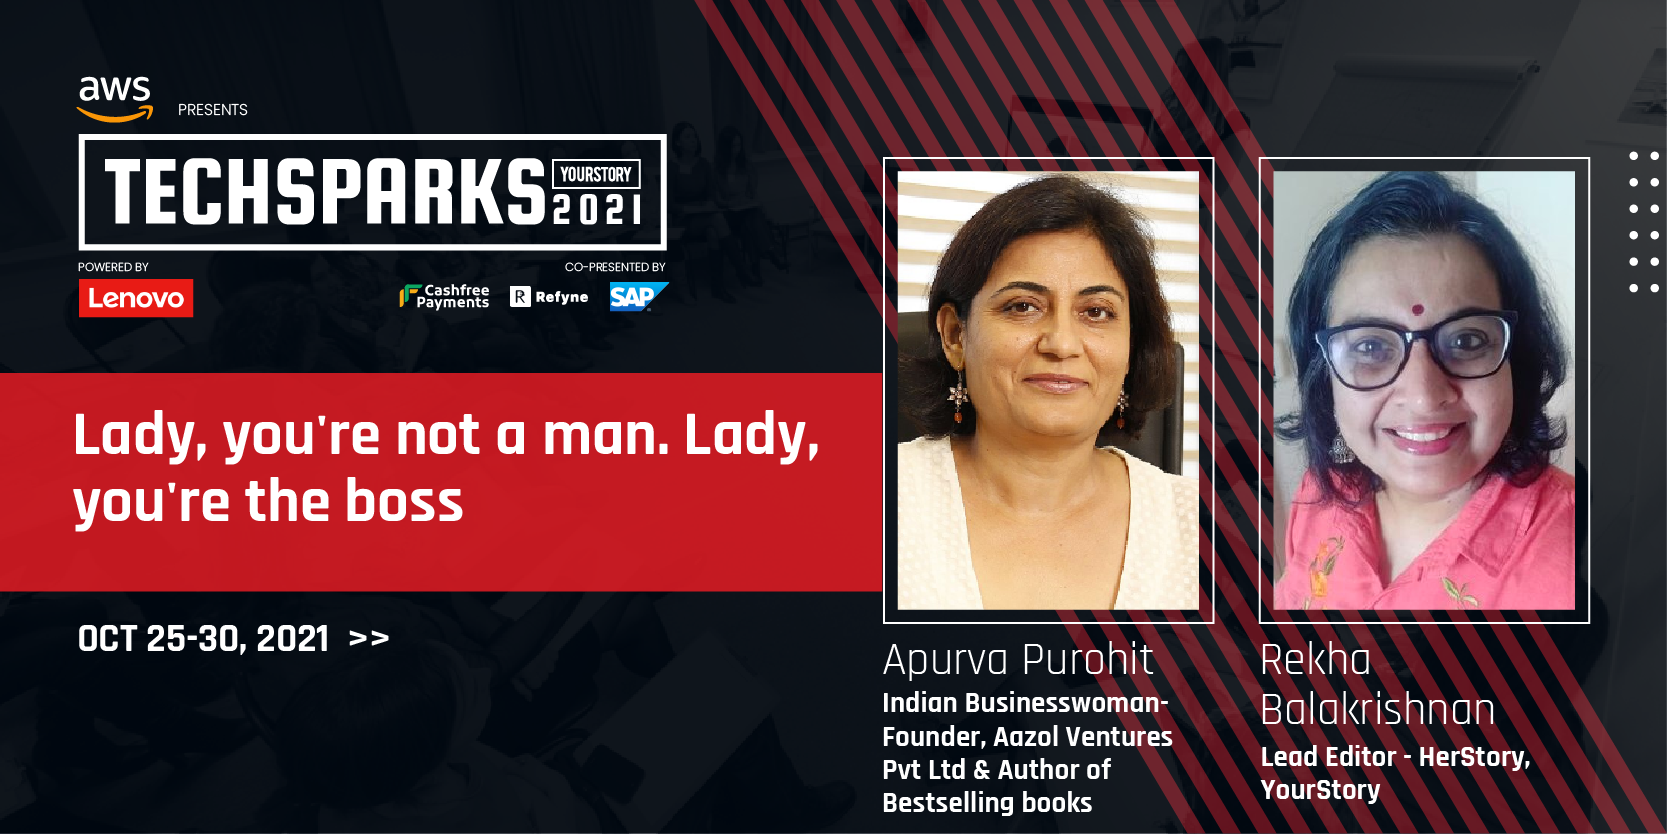 You have the choice to react, act, and take control of what you want from your life and career, says Apurva Purohit